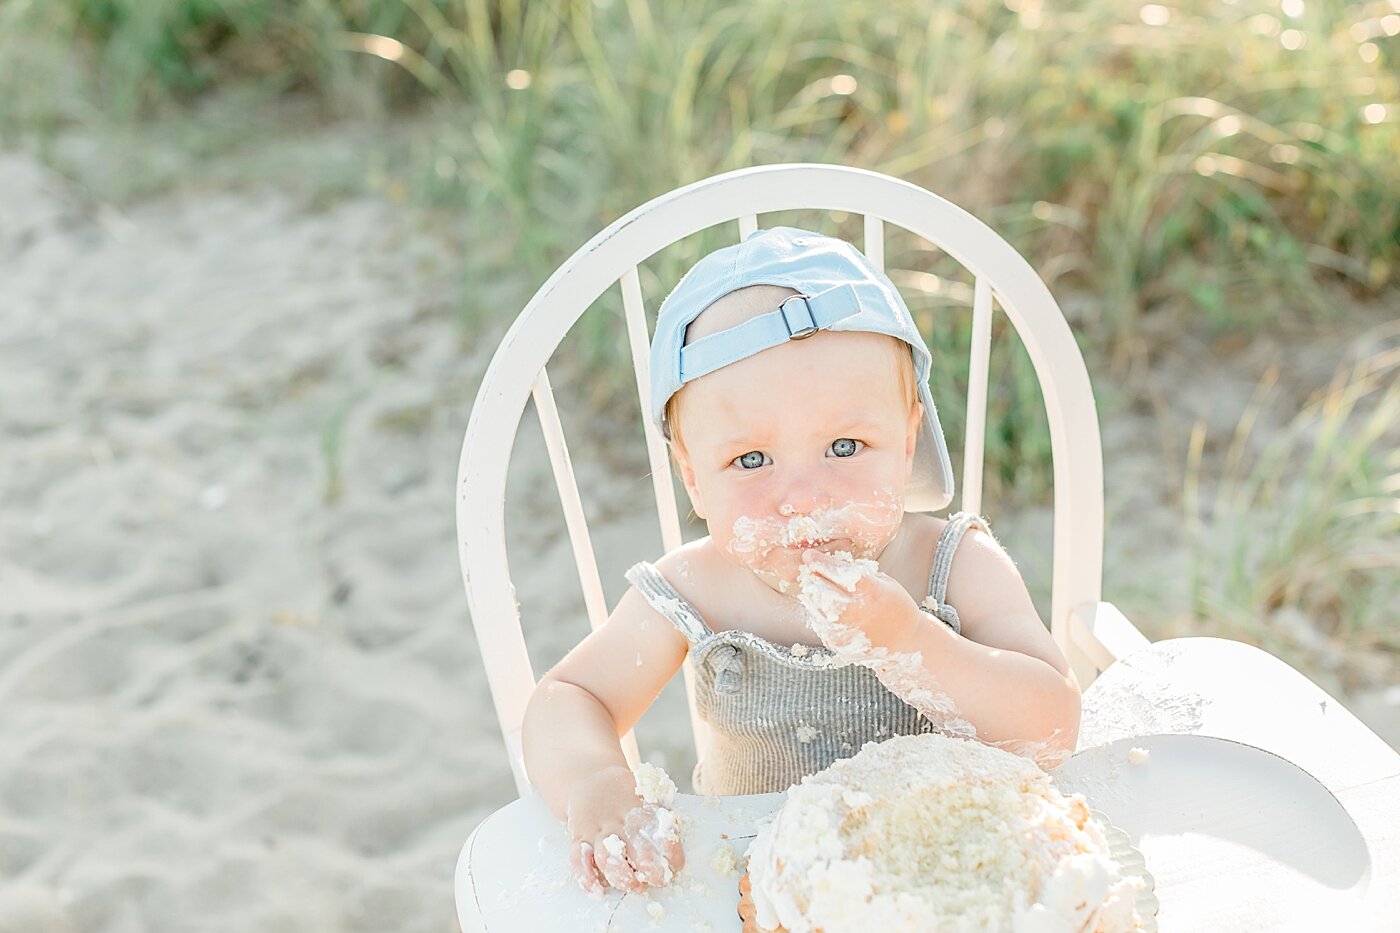 Cake smash at Sherwood Island for first birthday session. Photos by Kristin Wood Photography.